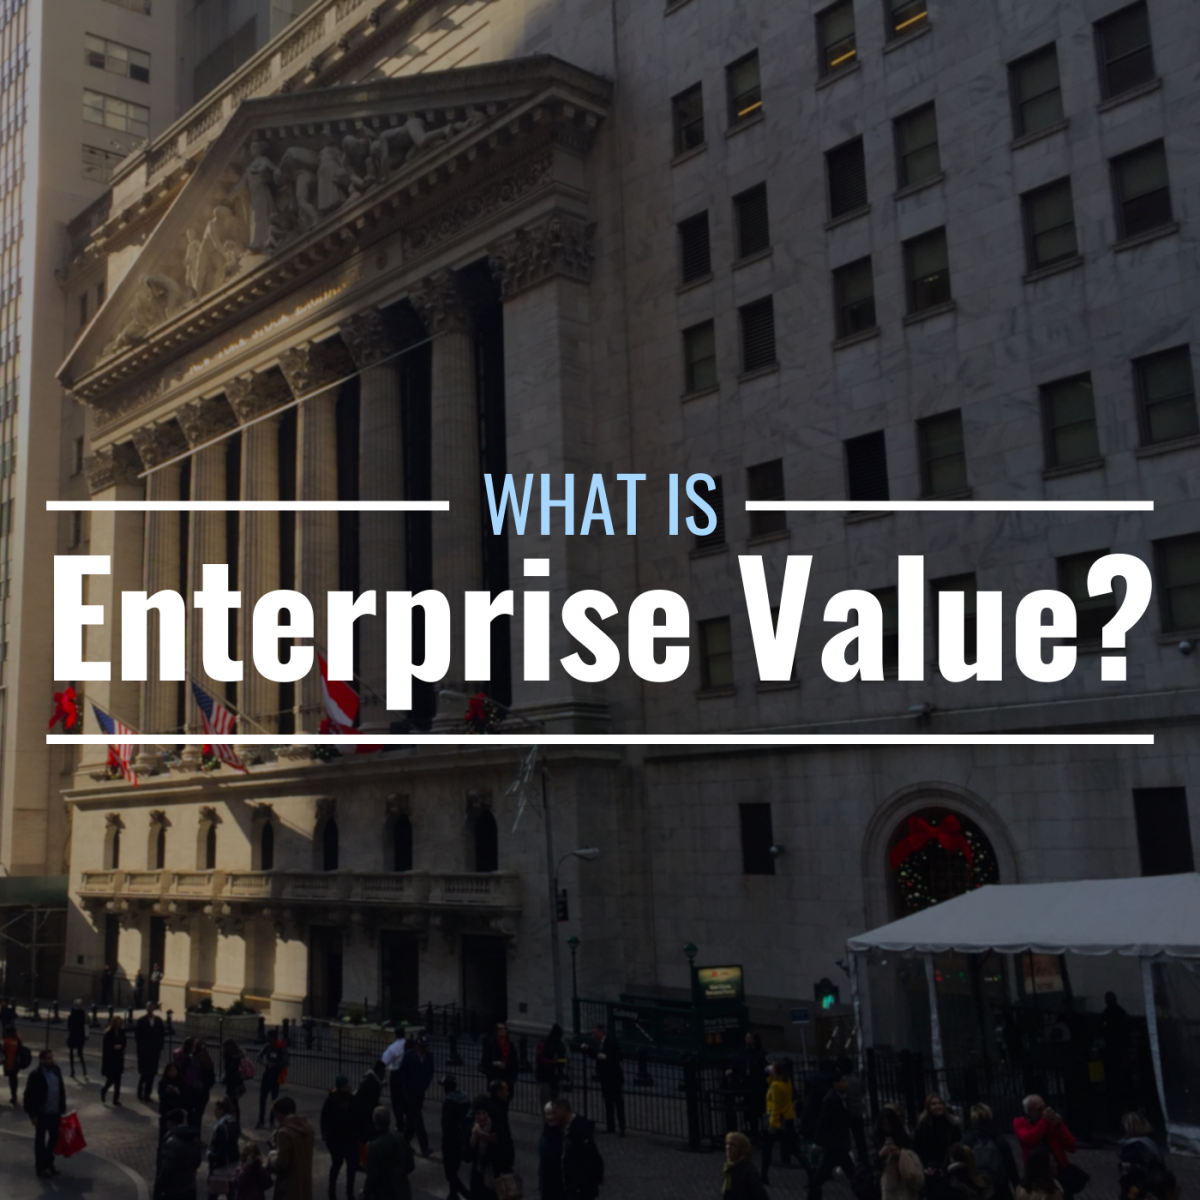 Photo of the New York Stock Exchange building on Wall Street with text overlay that reads "What Is Enterprise Value?"